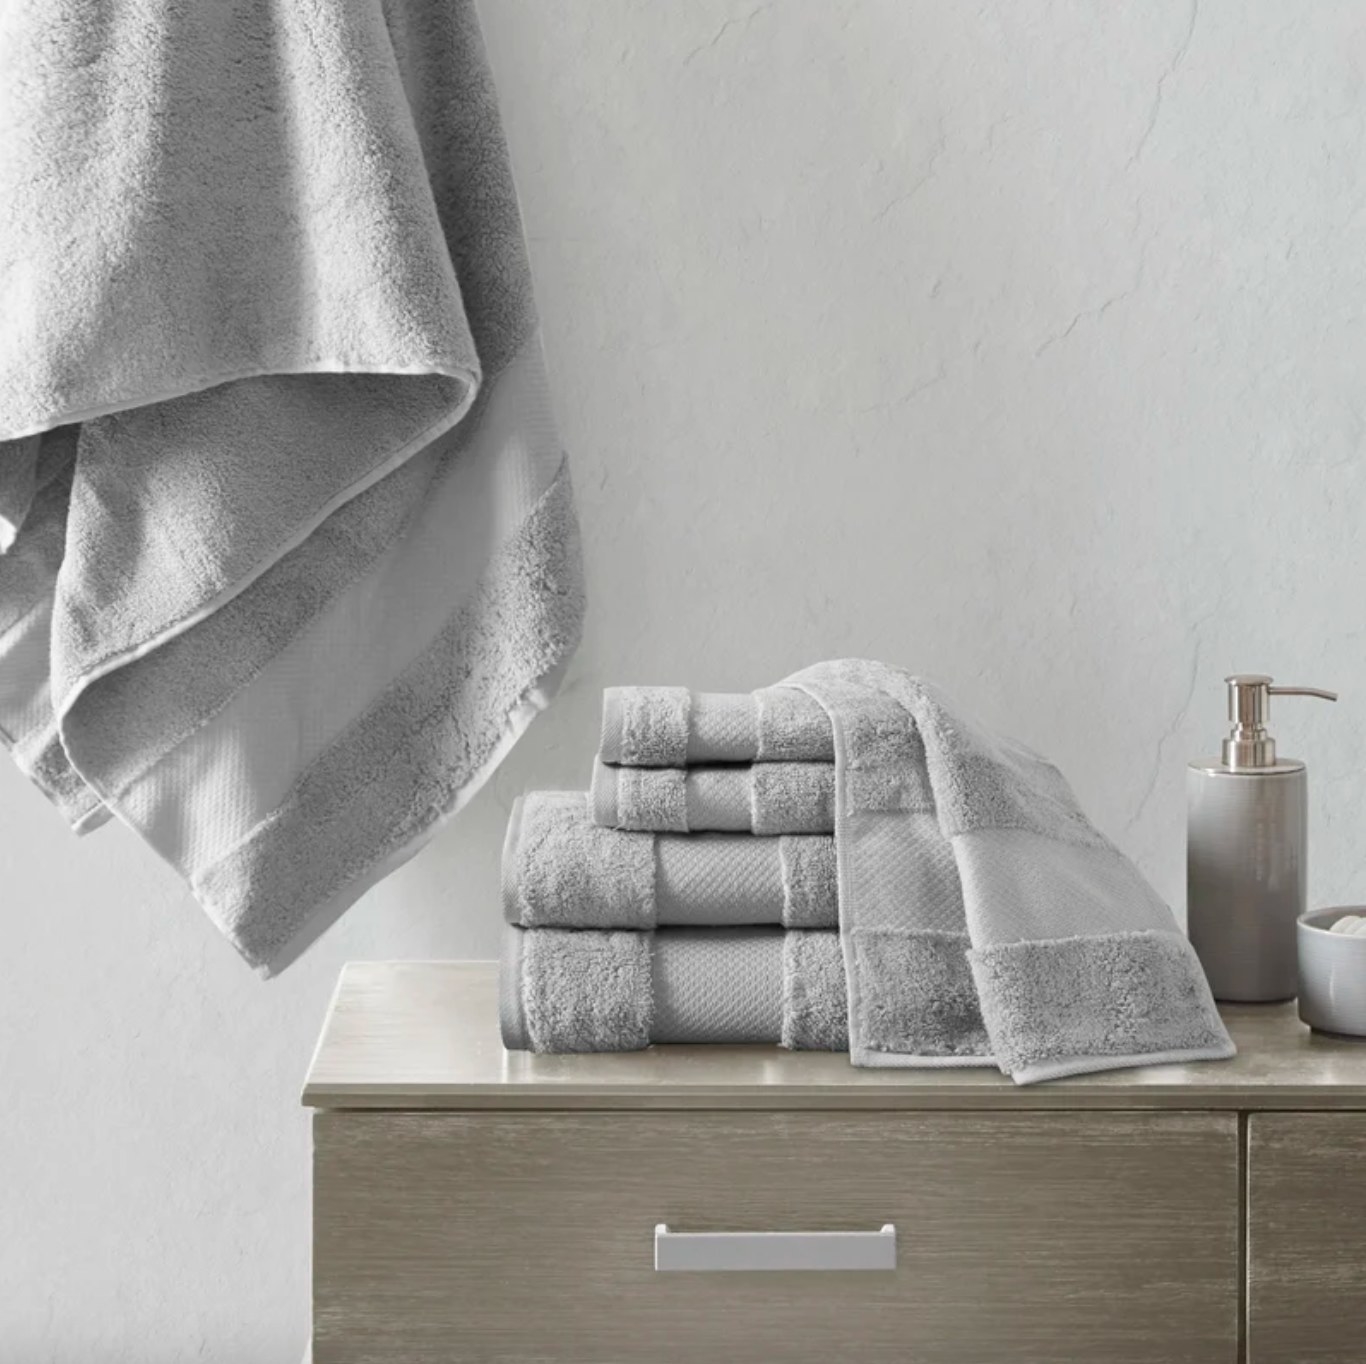 the grey towels stacked on a counter, with one hanging behind